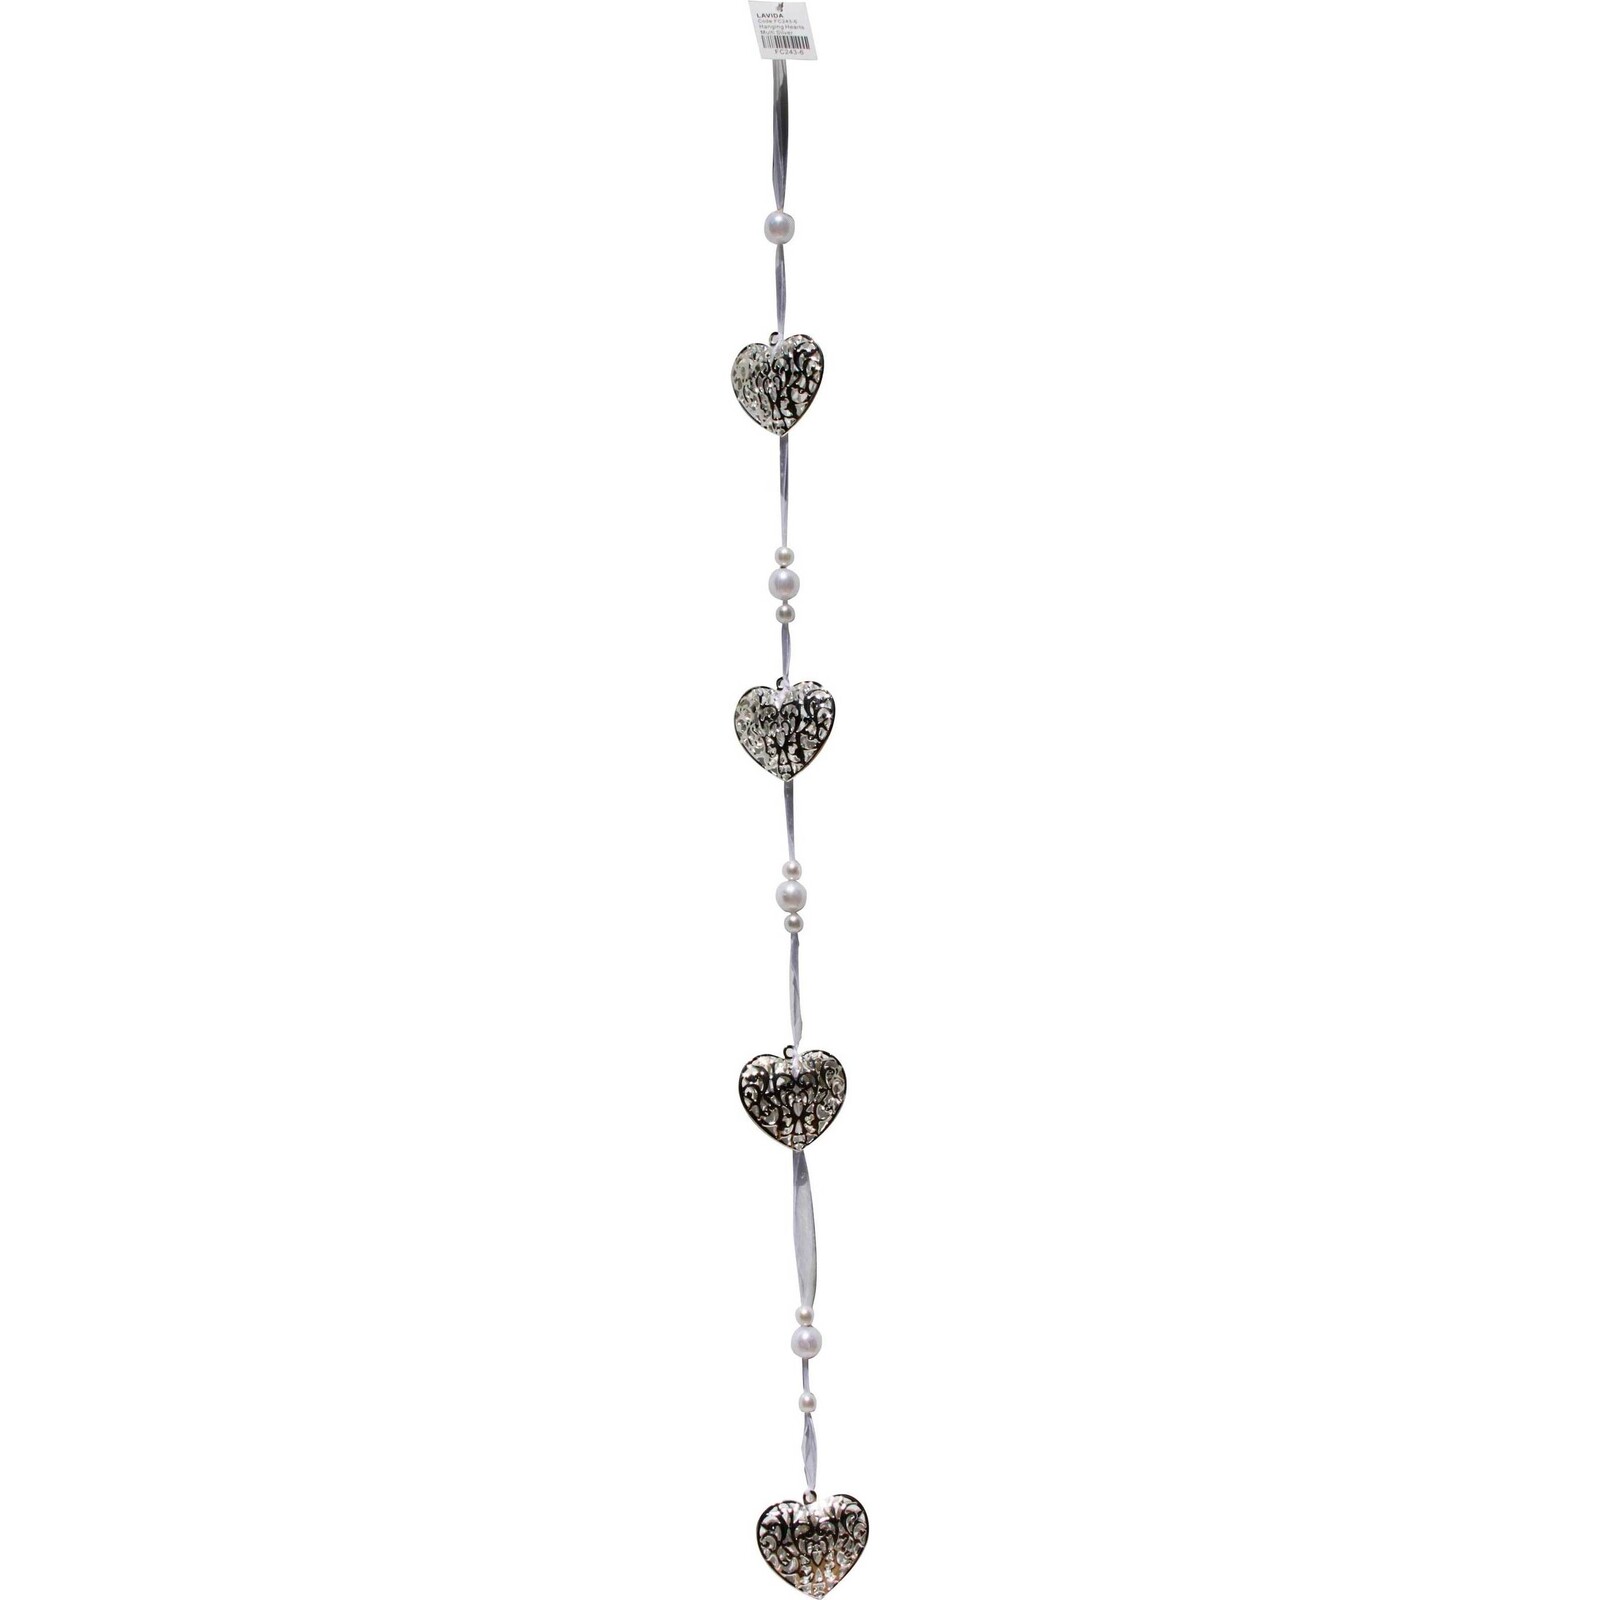 Hanging Hearts Multi Silver